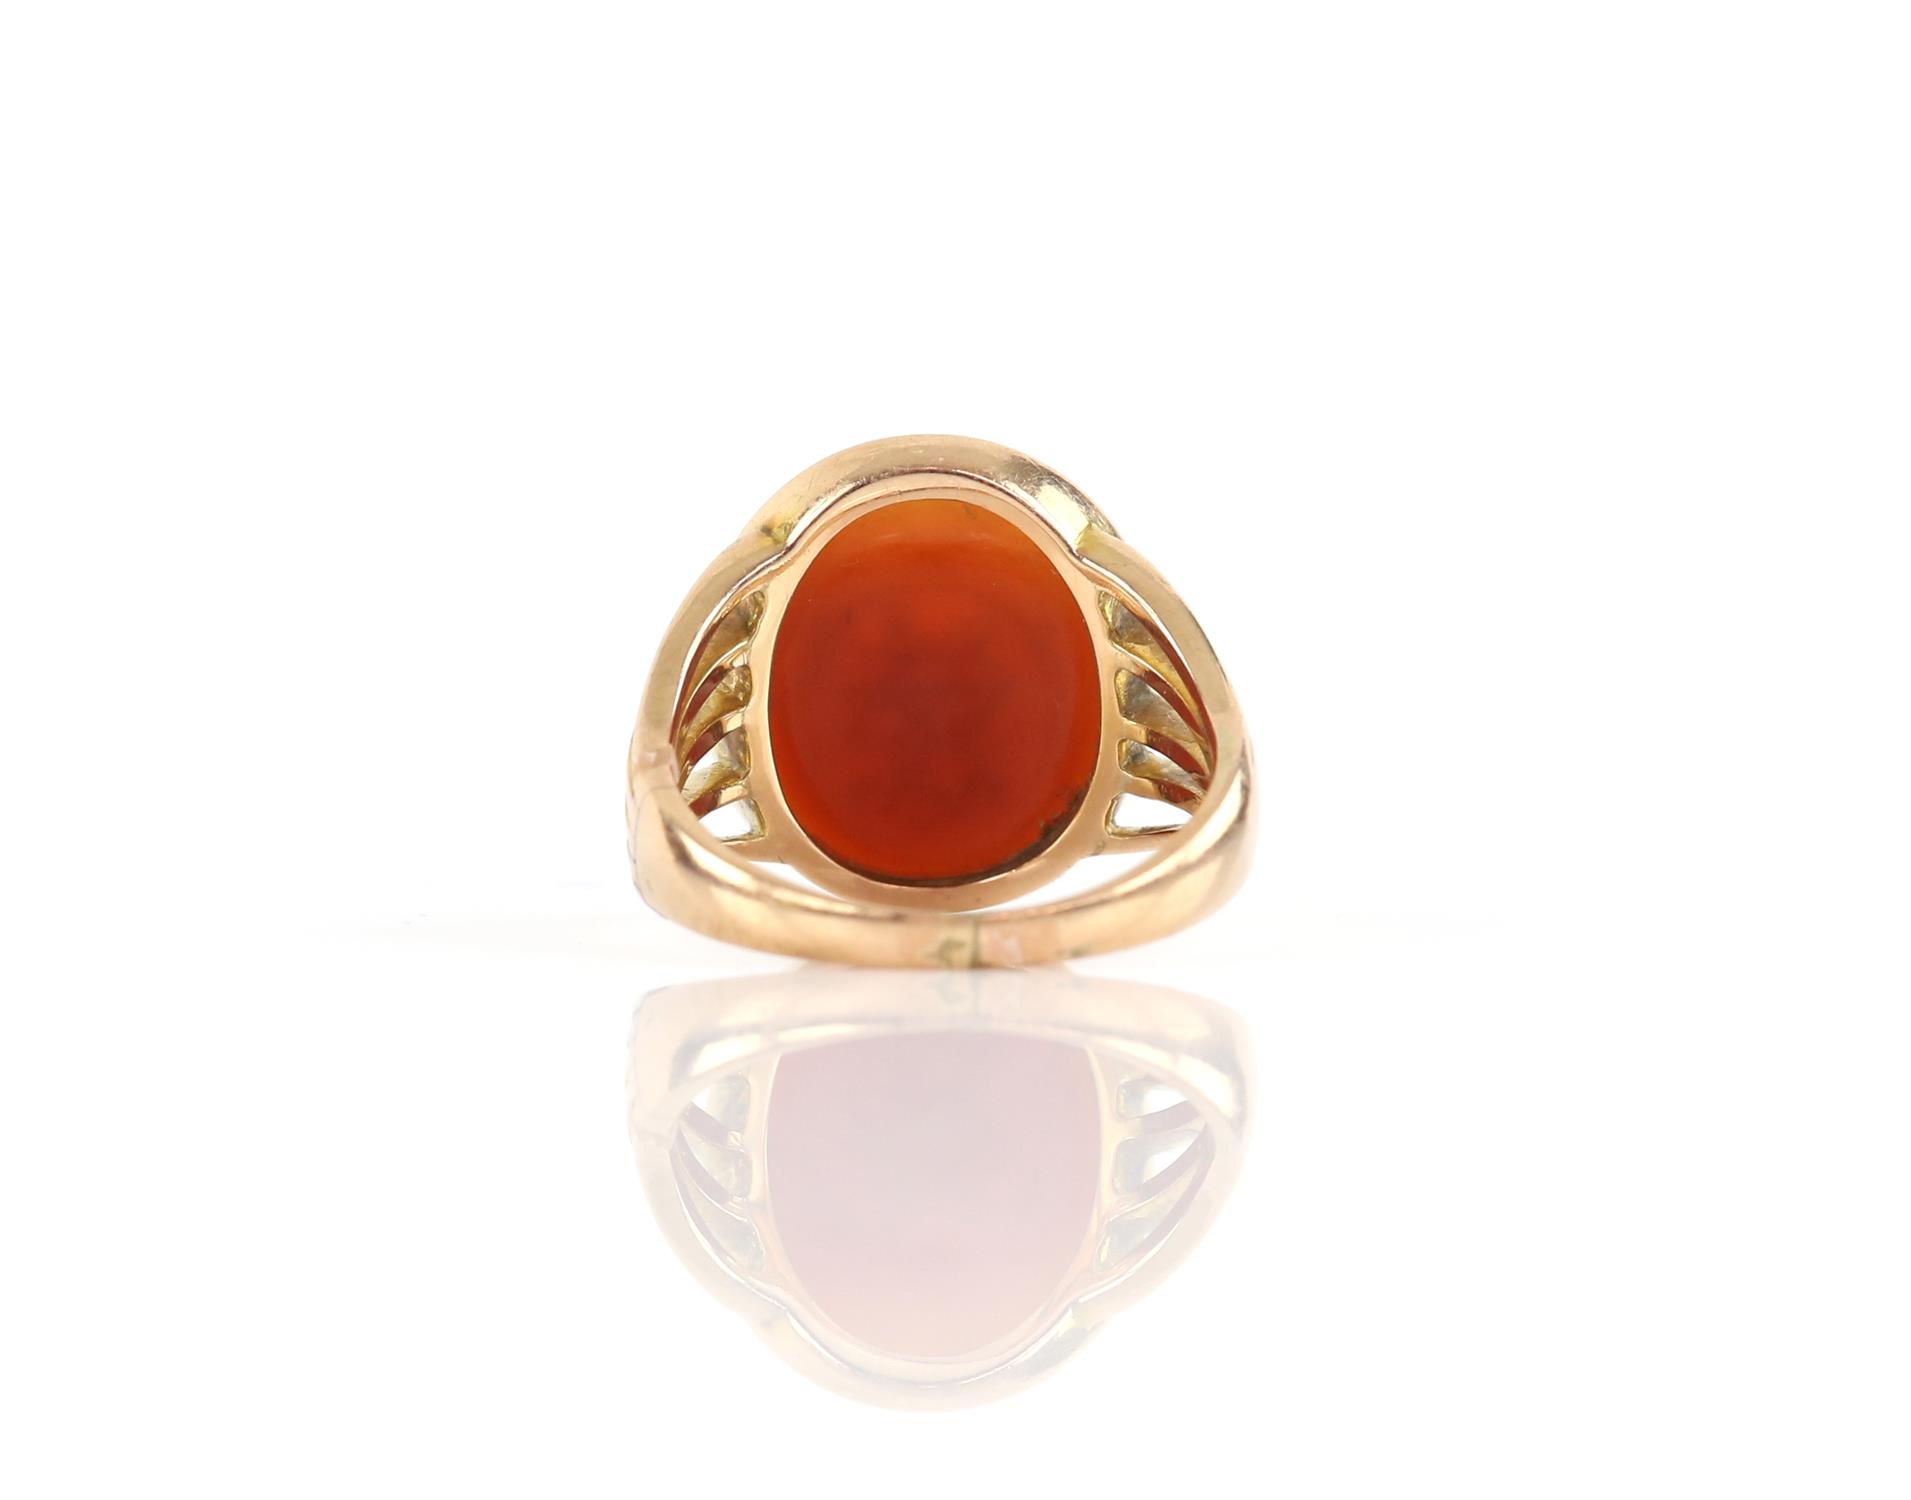 Victorian agate signet ring, with seal engraving, depicting a standing lion and scrolled initials - Image 3 of 3